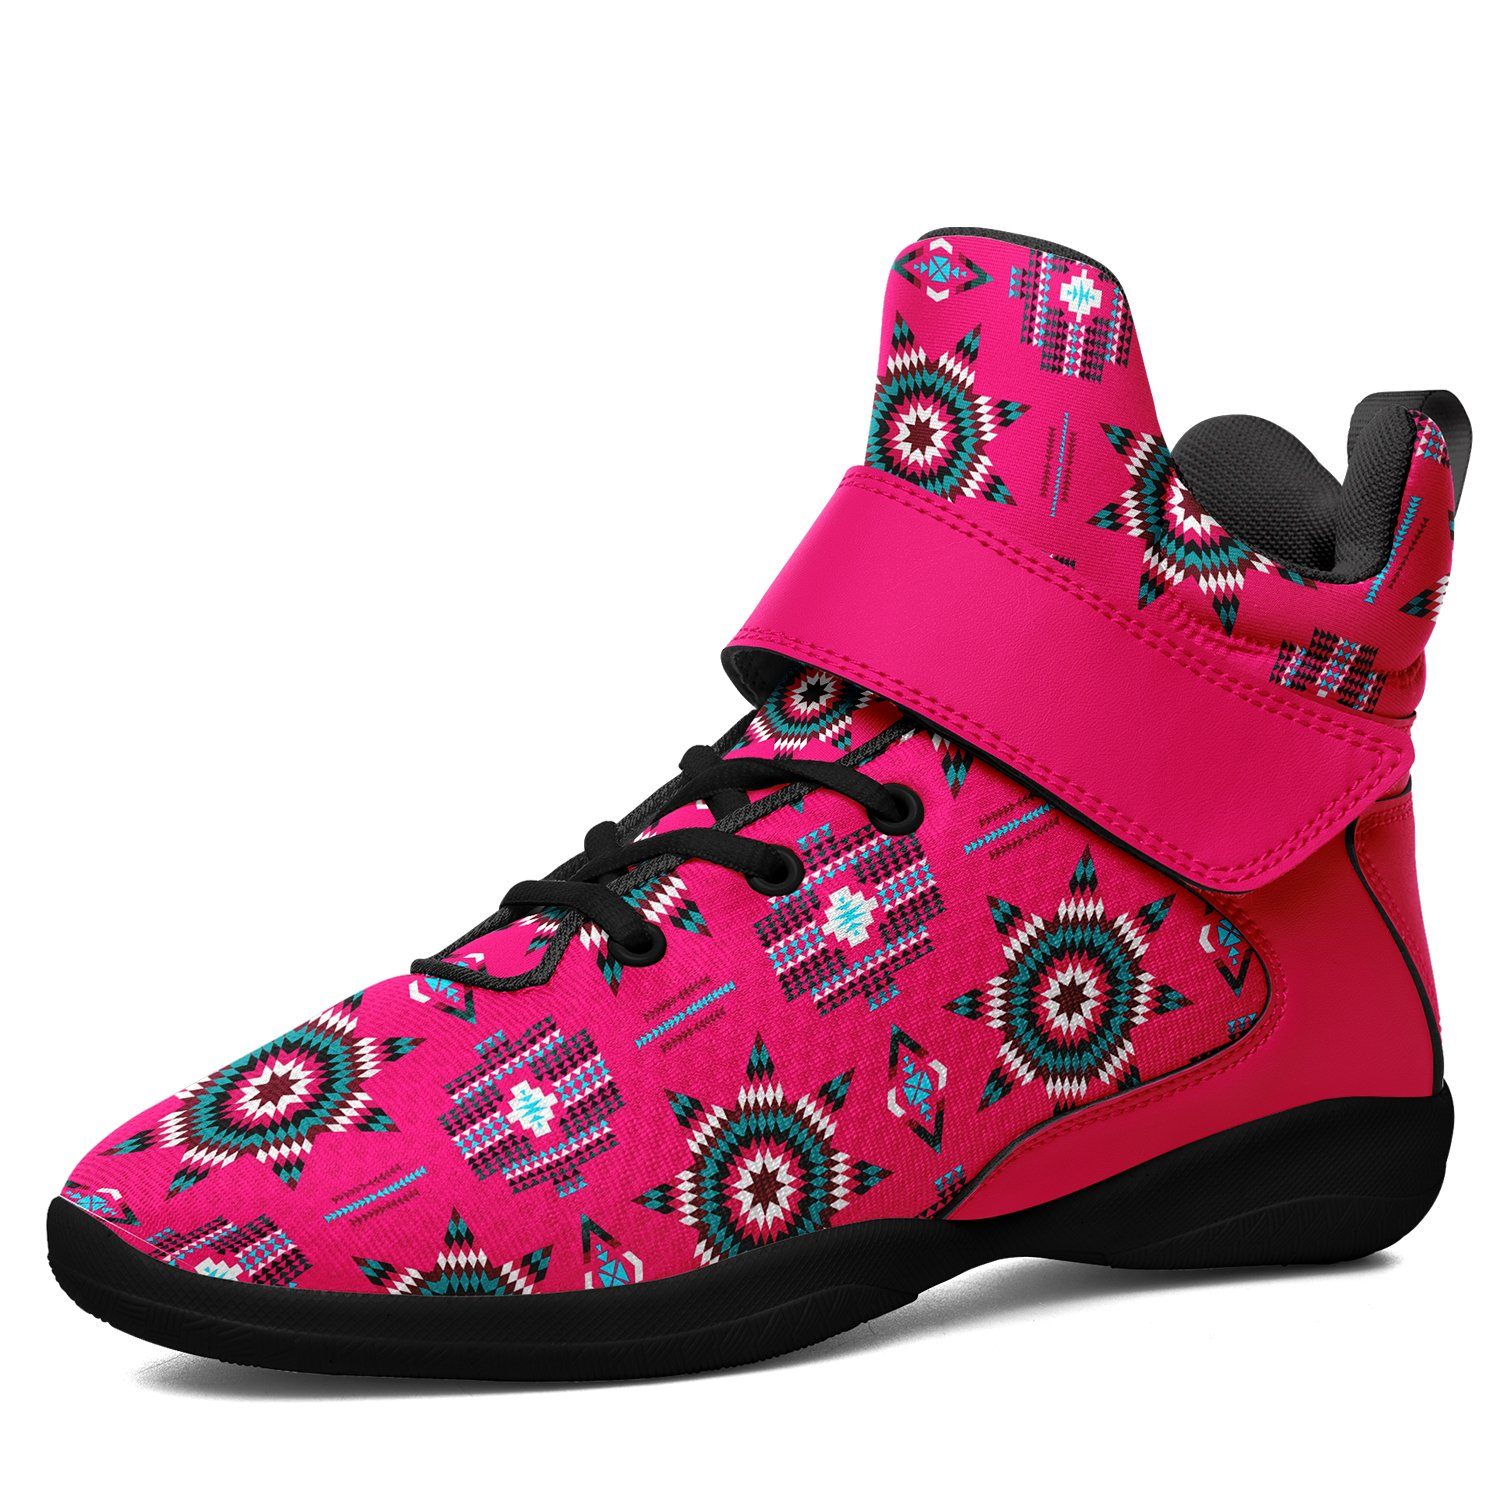 Rising Star Strawberry Moon Ipottaa Basketball / Sport High Top Shoes 49 Dzine US Women 4.5 / US Youth 3.5 / EUR 35 Black Sole with Pink Strap 